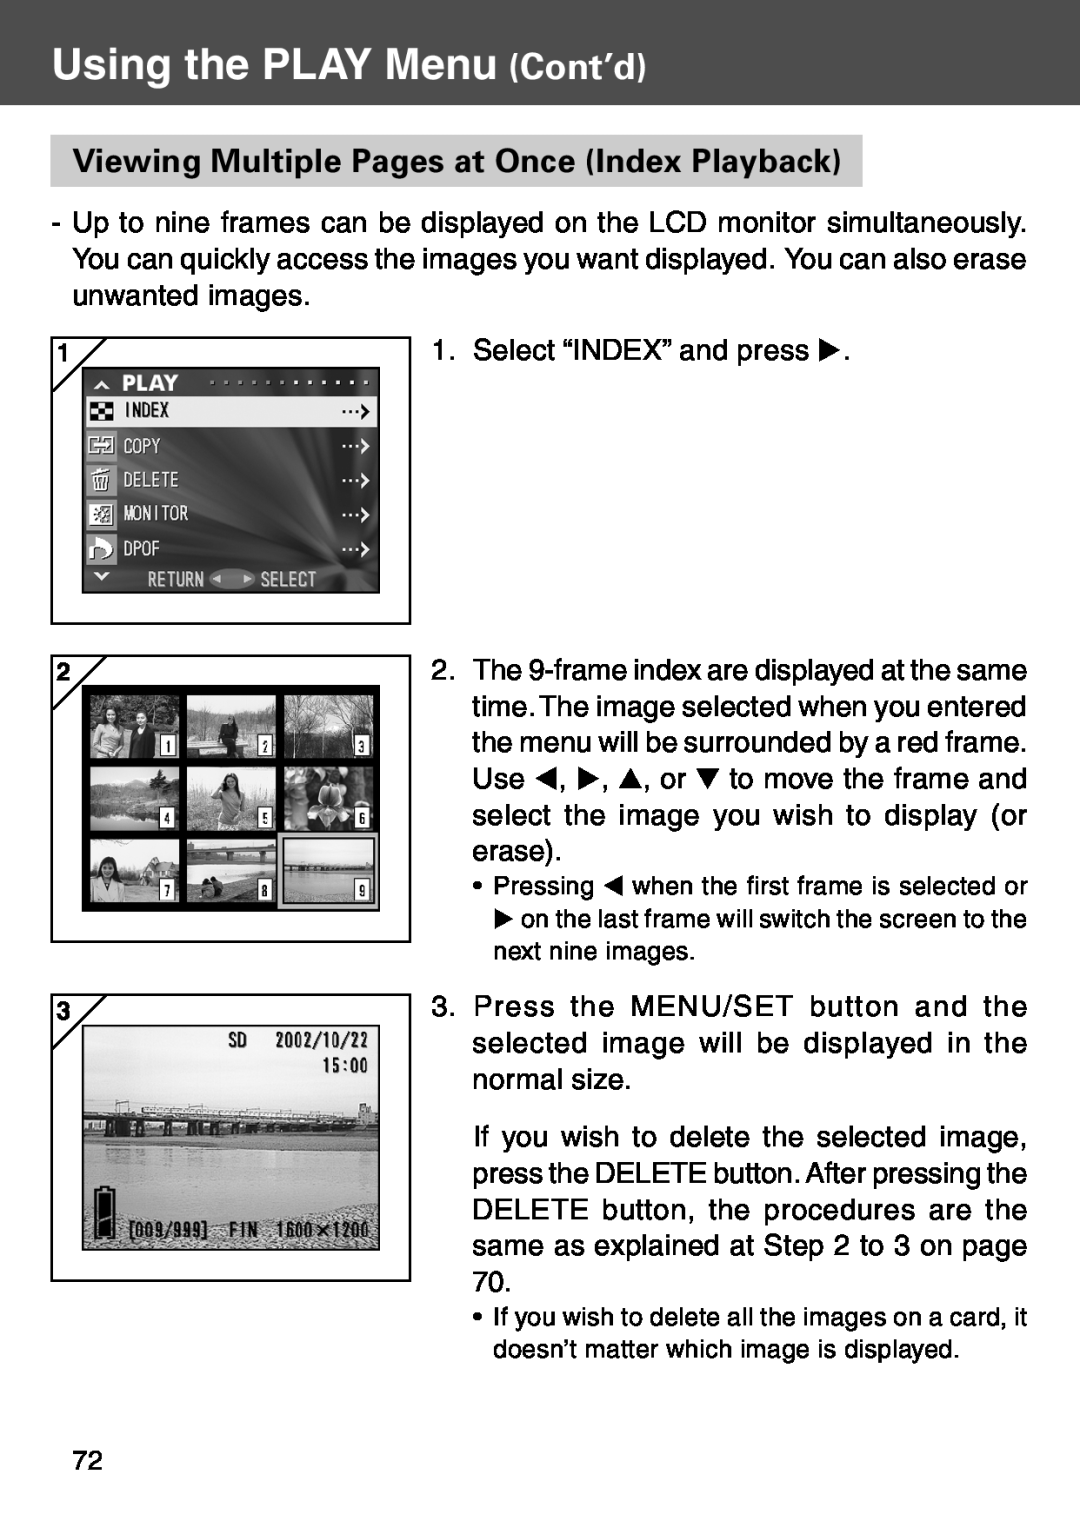 Konica Minolta KD-500Z user manual Using the PLAY Menu Cont’d, Viewing Multiple Pages at Once Index Playback 